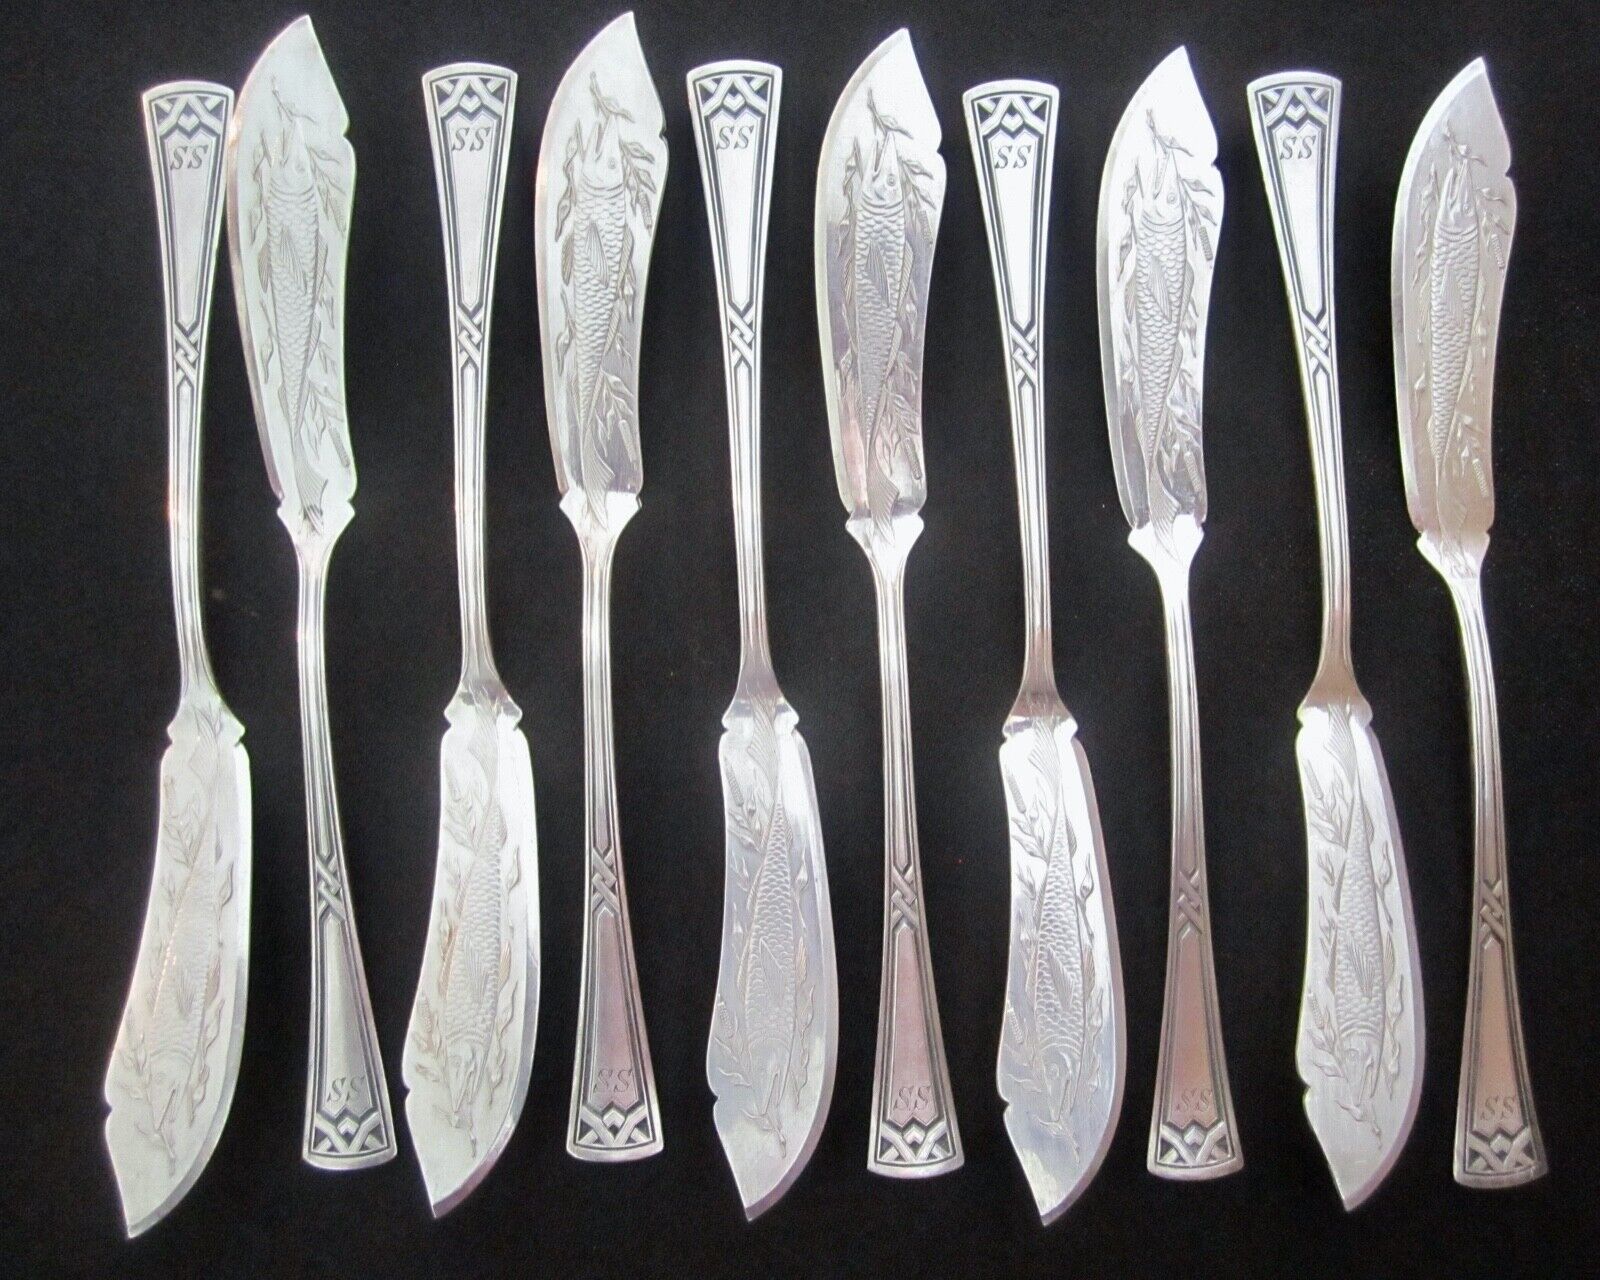 Lot 10 silver-plate fish trout knives etched designed silver-plated antique